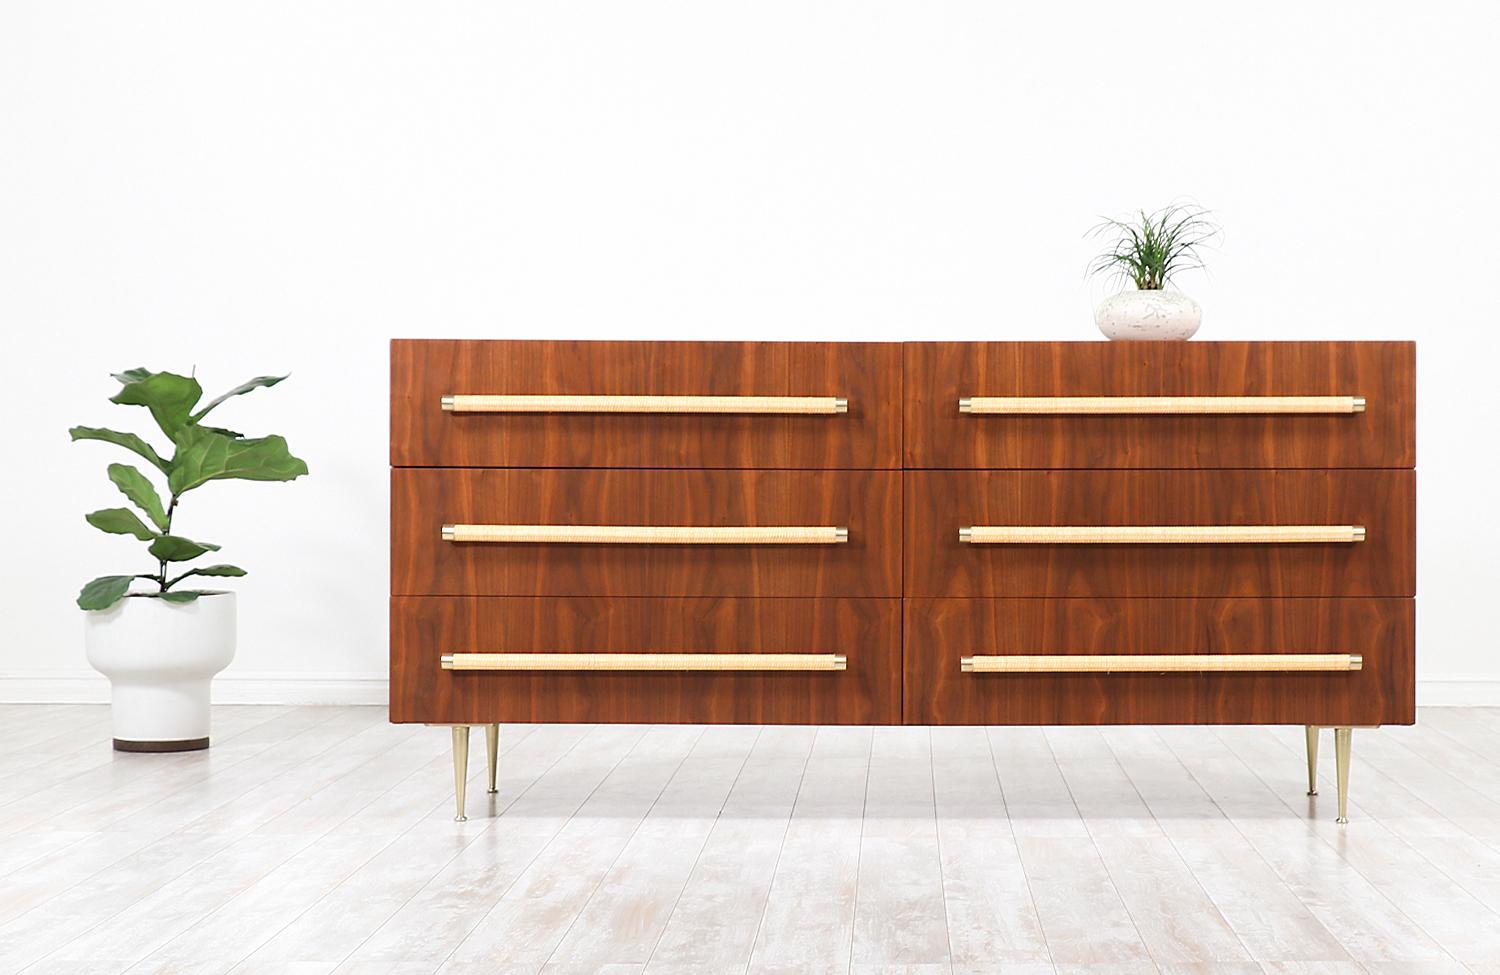 Stylish modern dresser designed by British-born architect T.H. Robsjohn-Gibbings for Widdicomb in the United States, circa 1950s. This striking design features a sturdy walnut wood case with six drawers and solid brass legs perfectly complementing